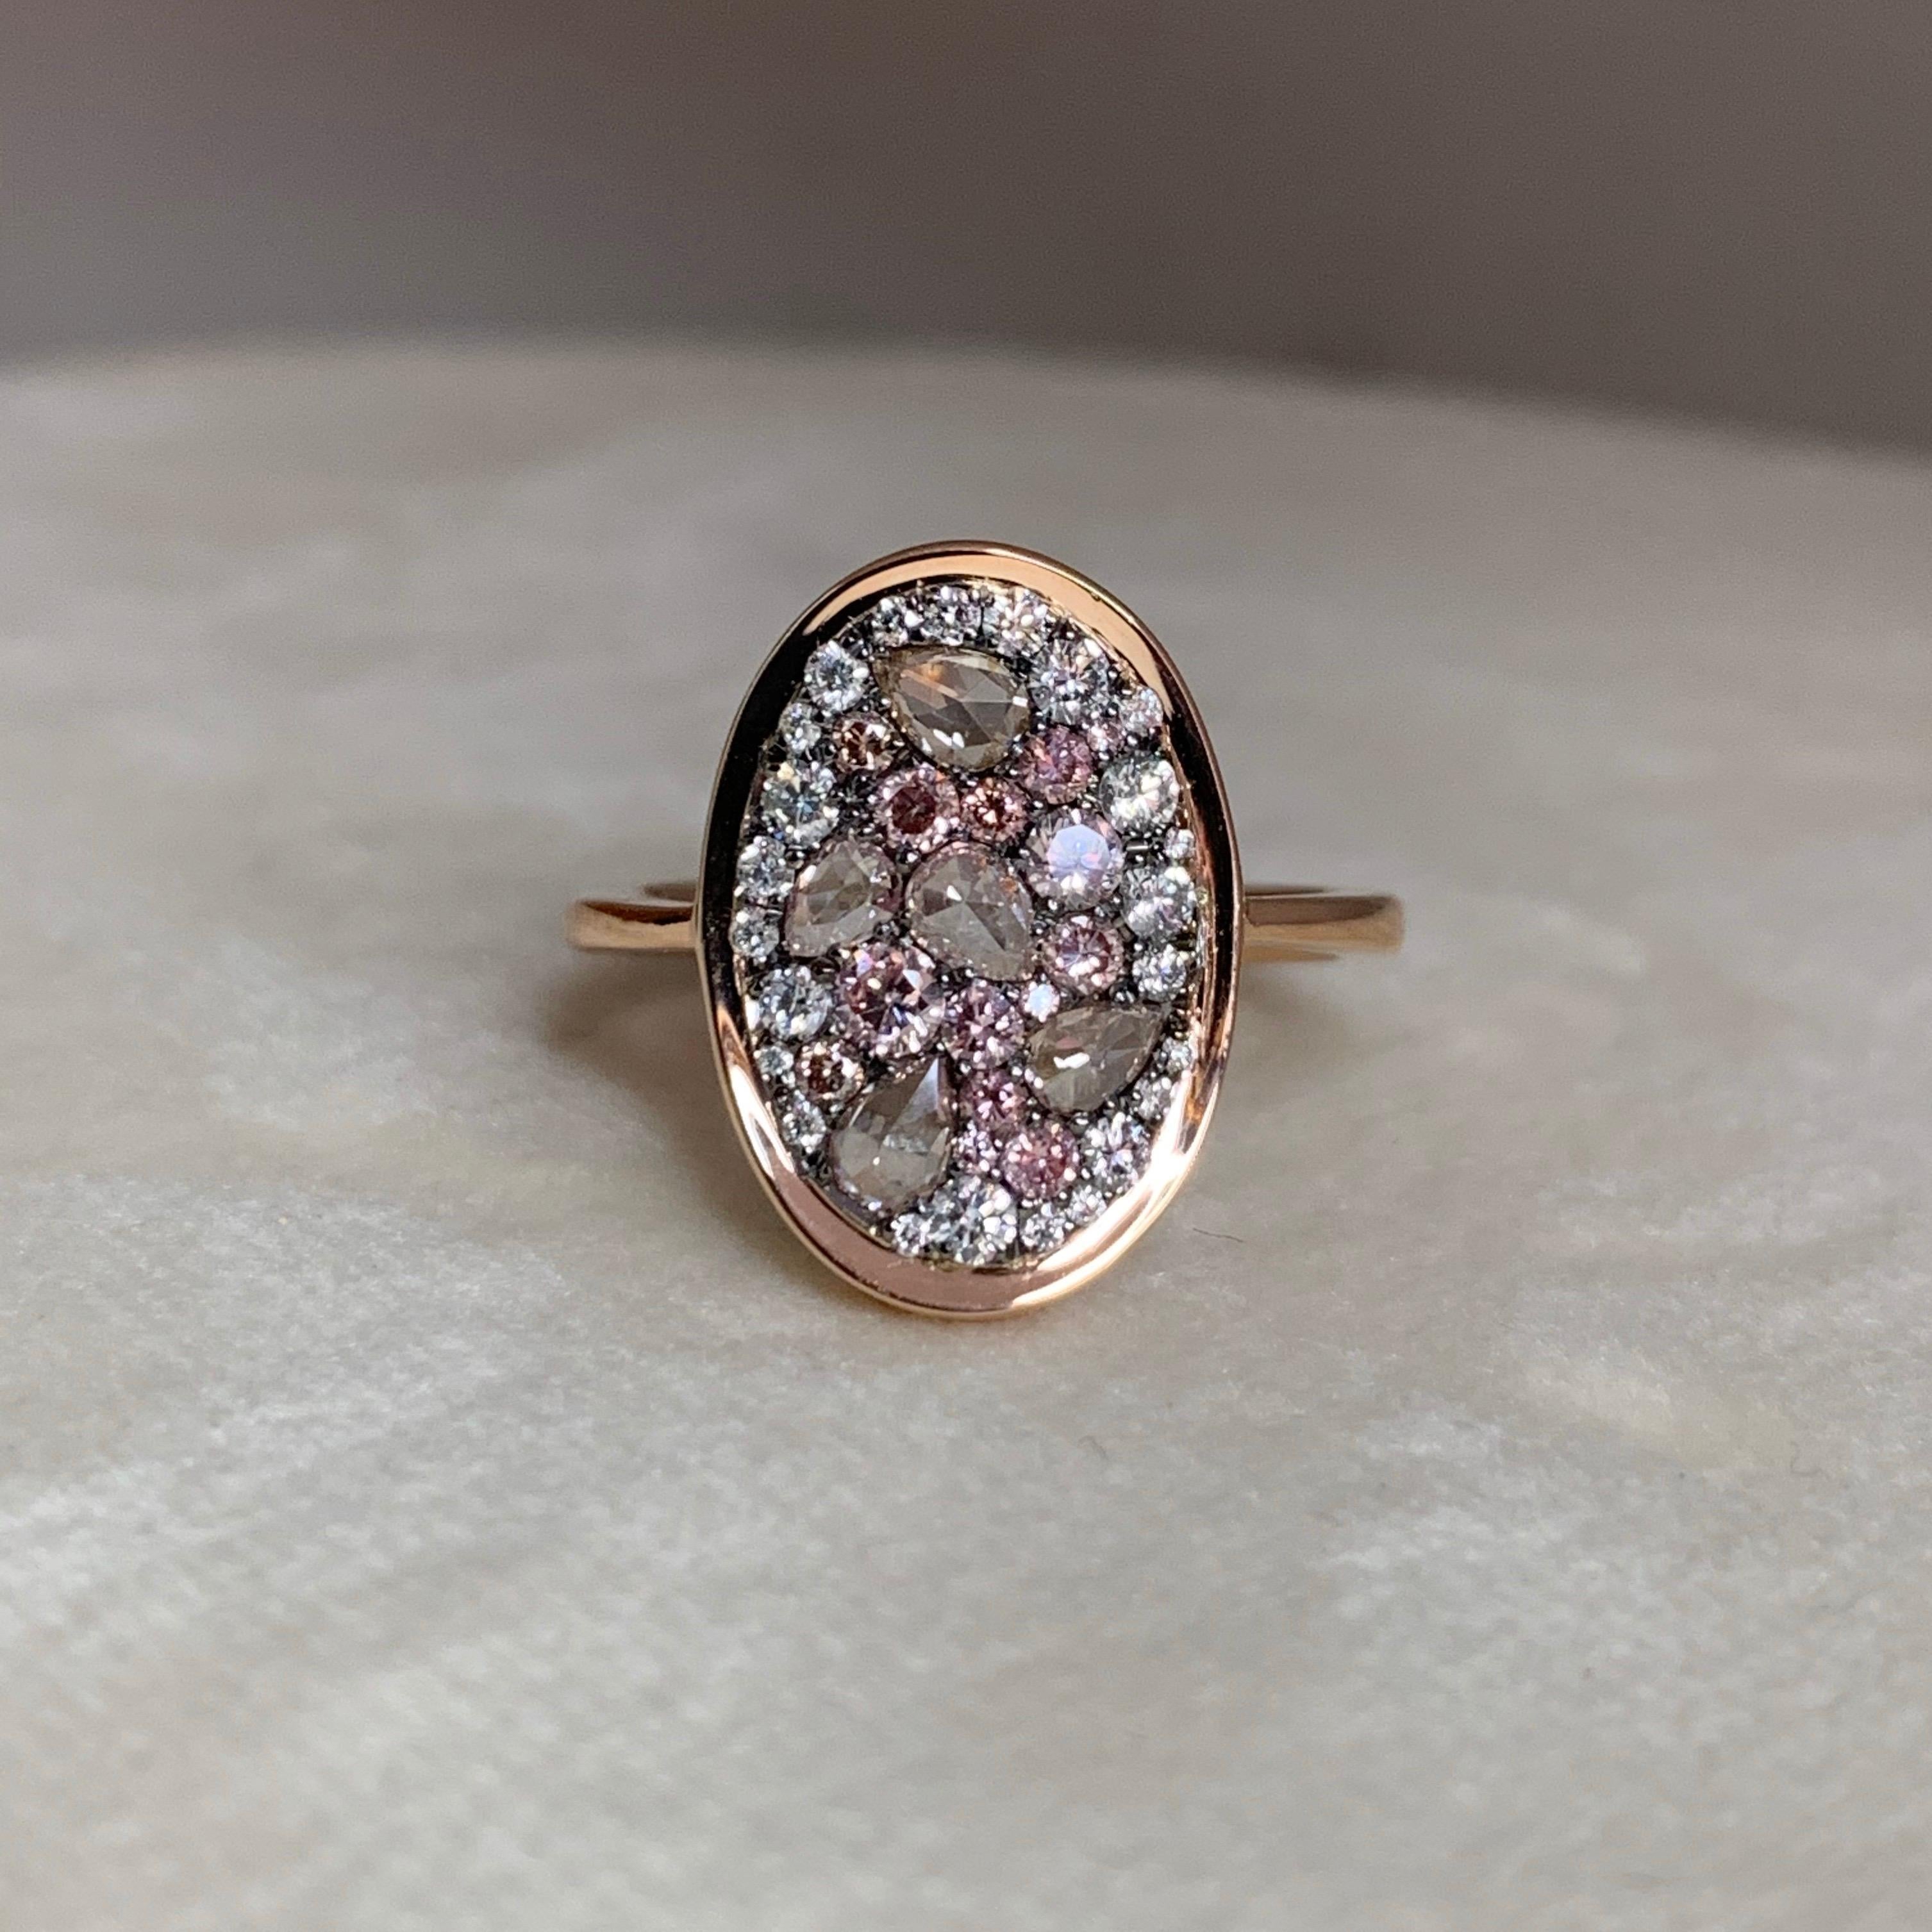 One of a kind ring handmade in Belgium by jewellery artist Joke Quick in 4,4g 18K Rose gold & blackened sterling silver ( 1,3 g) (The stones are set on blackened sterlingsilver to create a black background for the stones) Pave set with Fancy pink